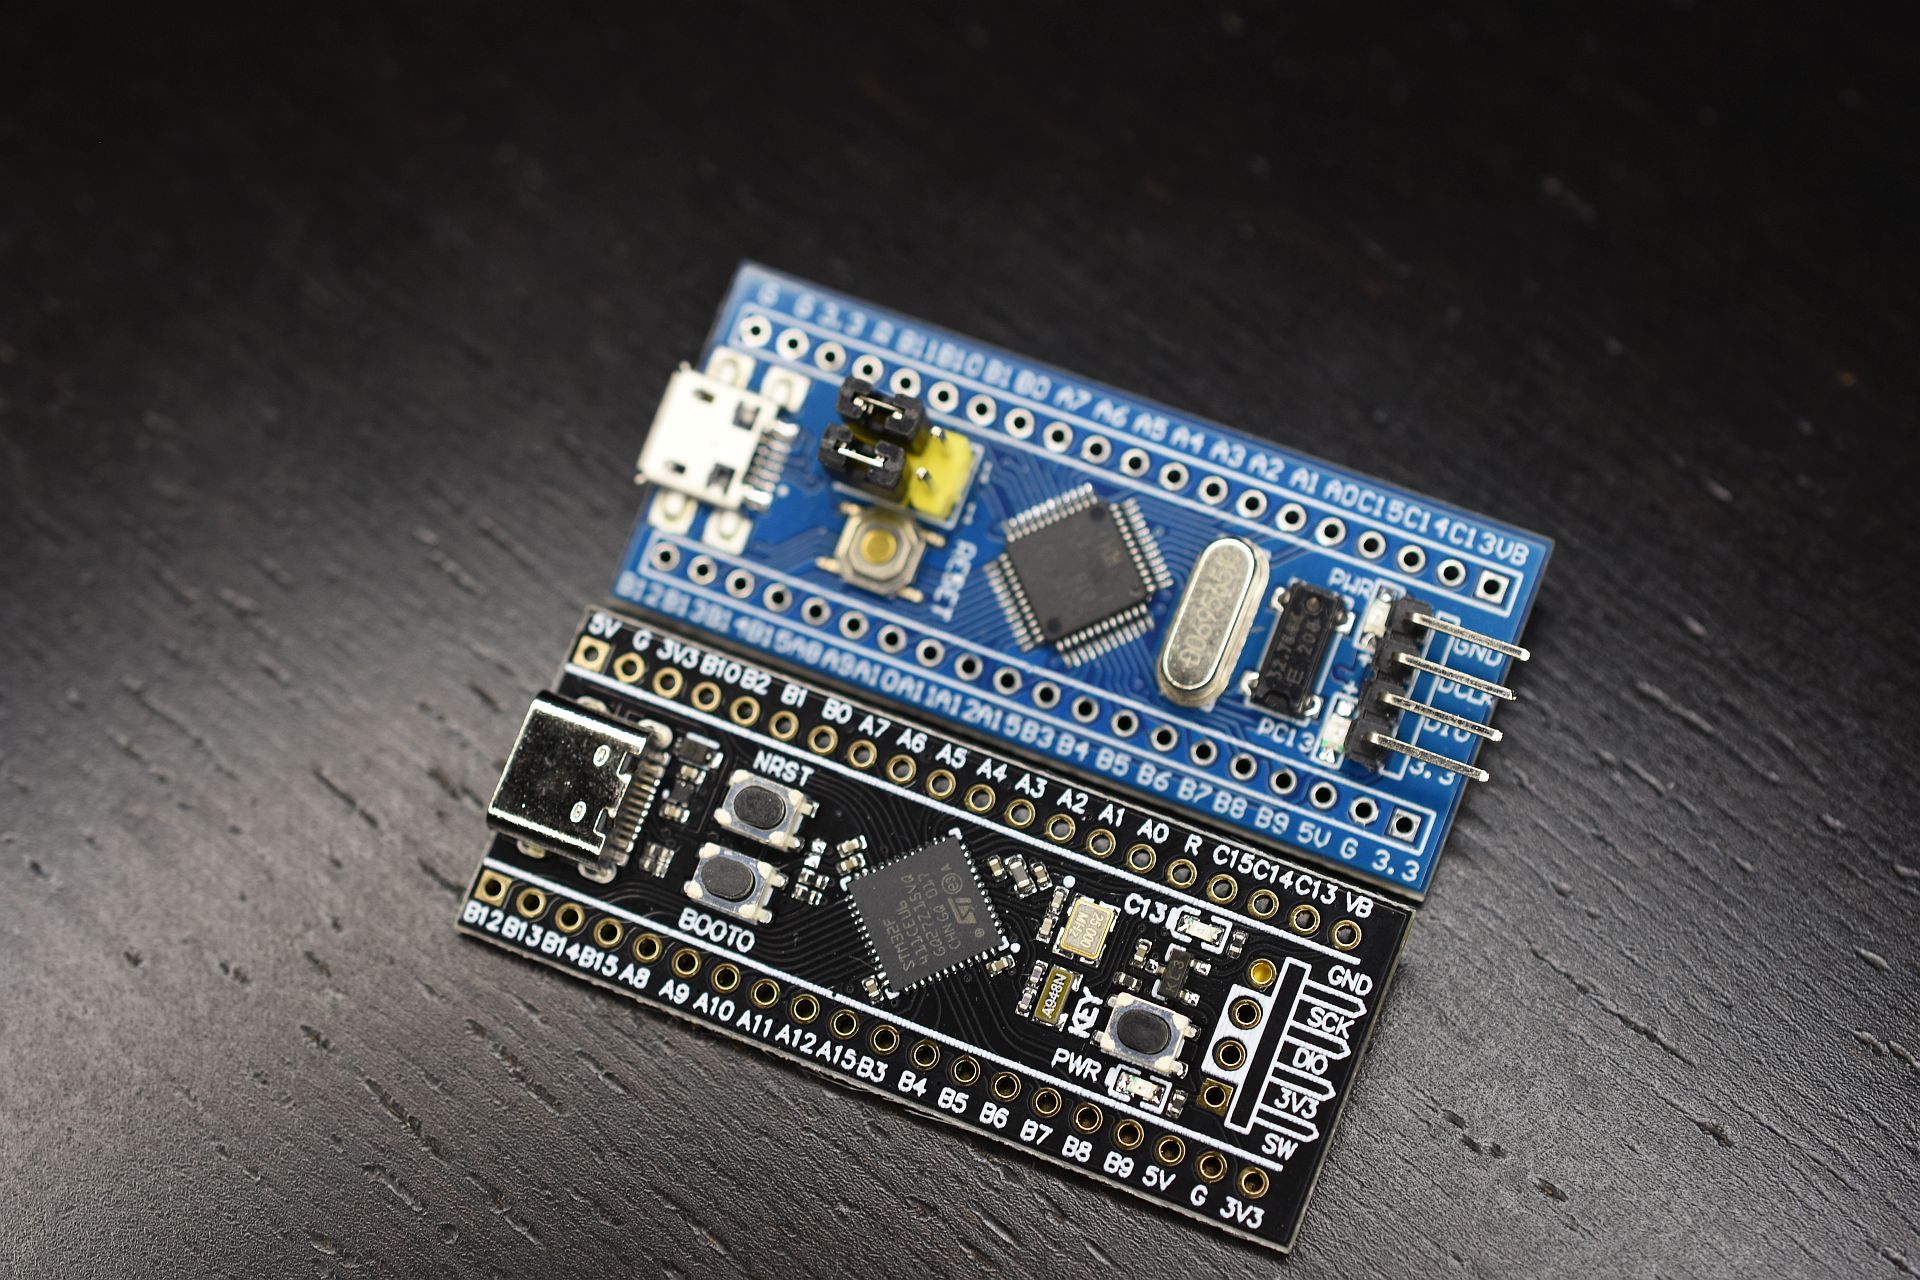 Blue Pill Vs Black Pill Transitioning From Stm32f103 To Stm32f411 Hackaday